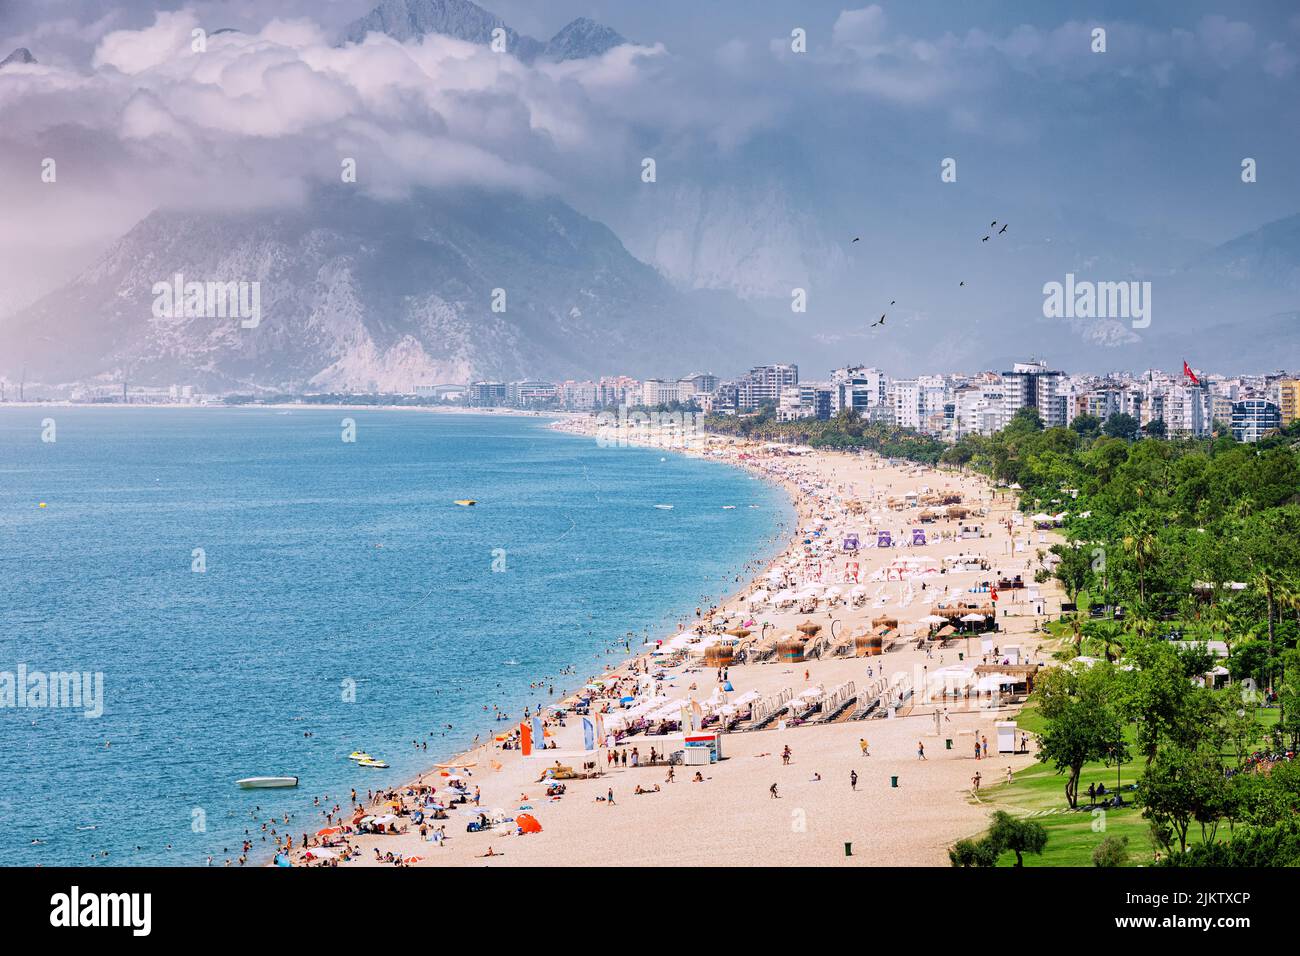 Crowded Antalya city Konyaalti beach with hundreds of vacationers and tourists resting, sunbathing and swimming at extremely hot summer day in resort Stock Photo